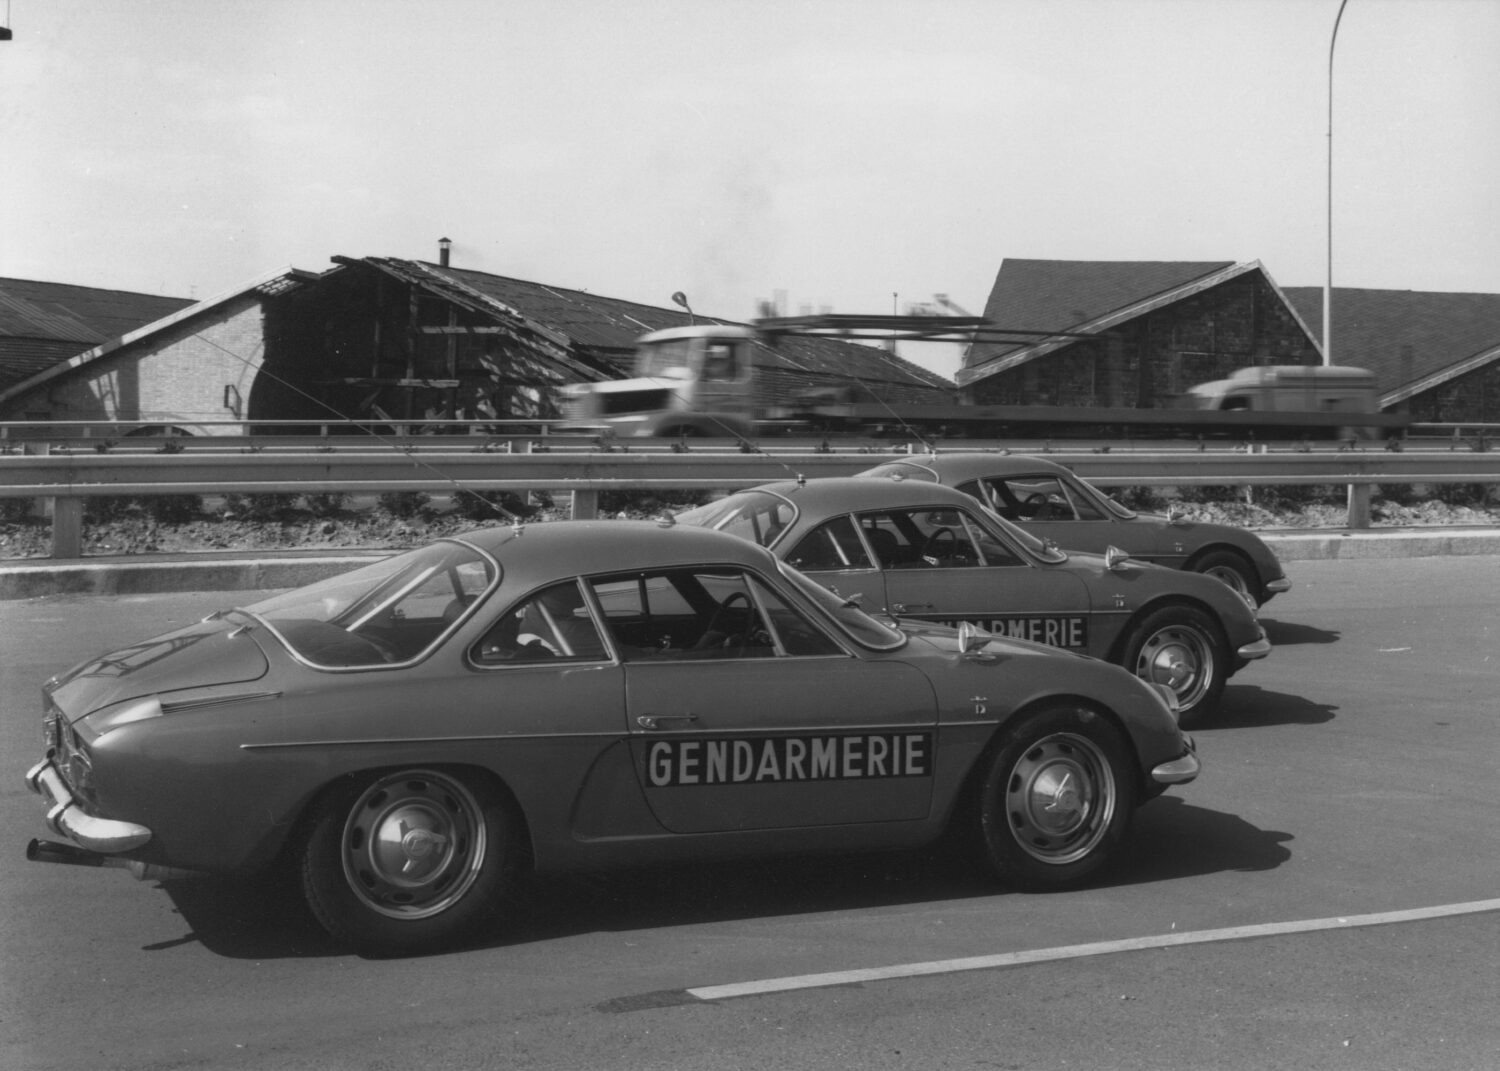 2022 - Story - The Alpine A110 and France’s Gendarmerie – Then and Now